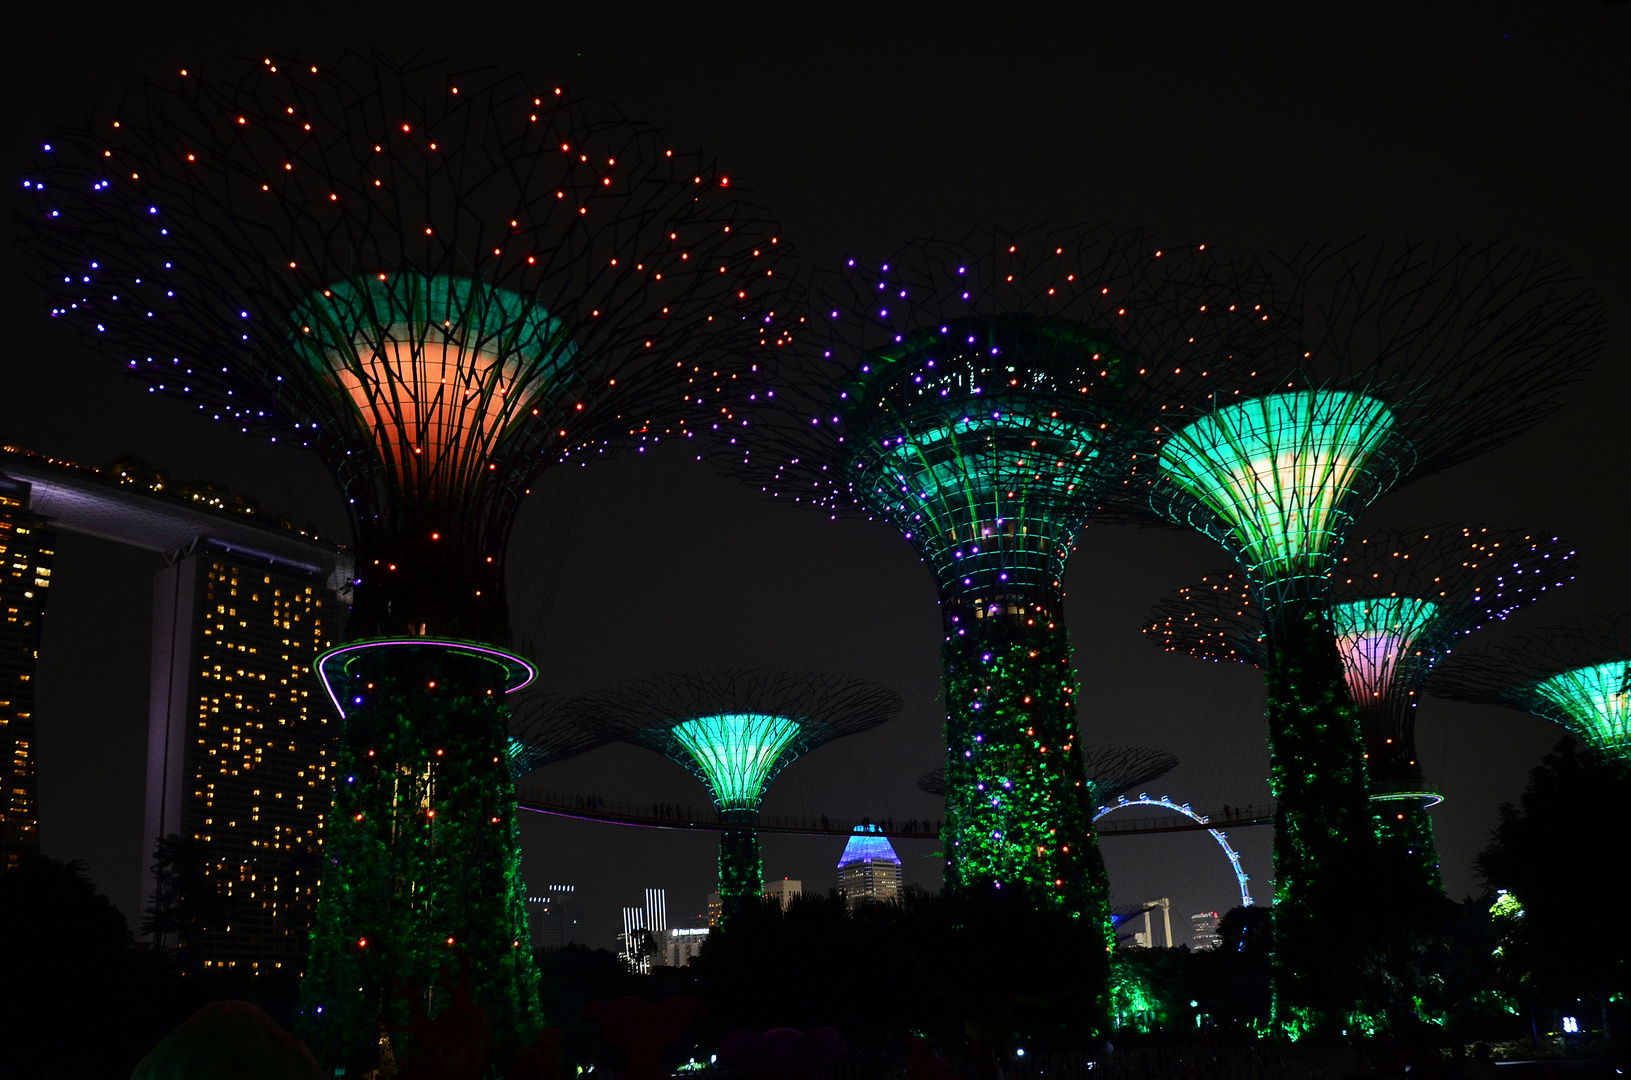 Singapore - Gardens by the Bay at night